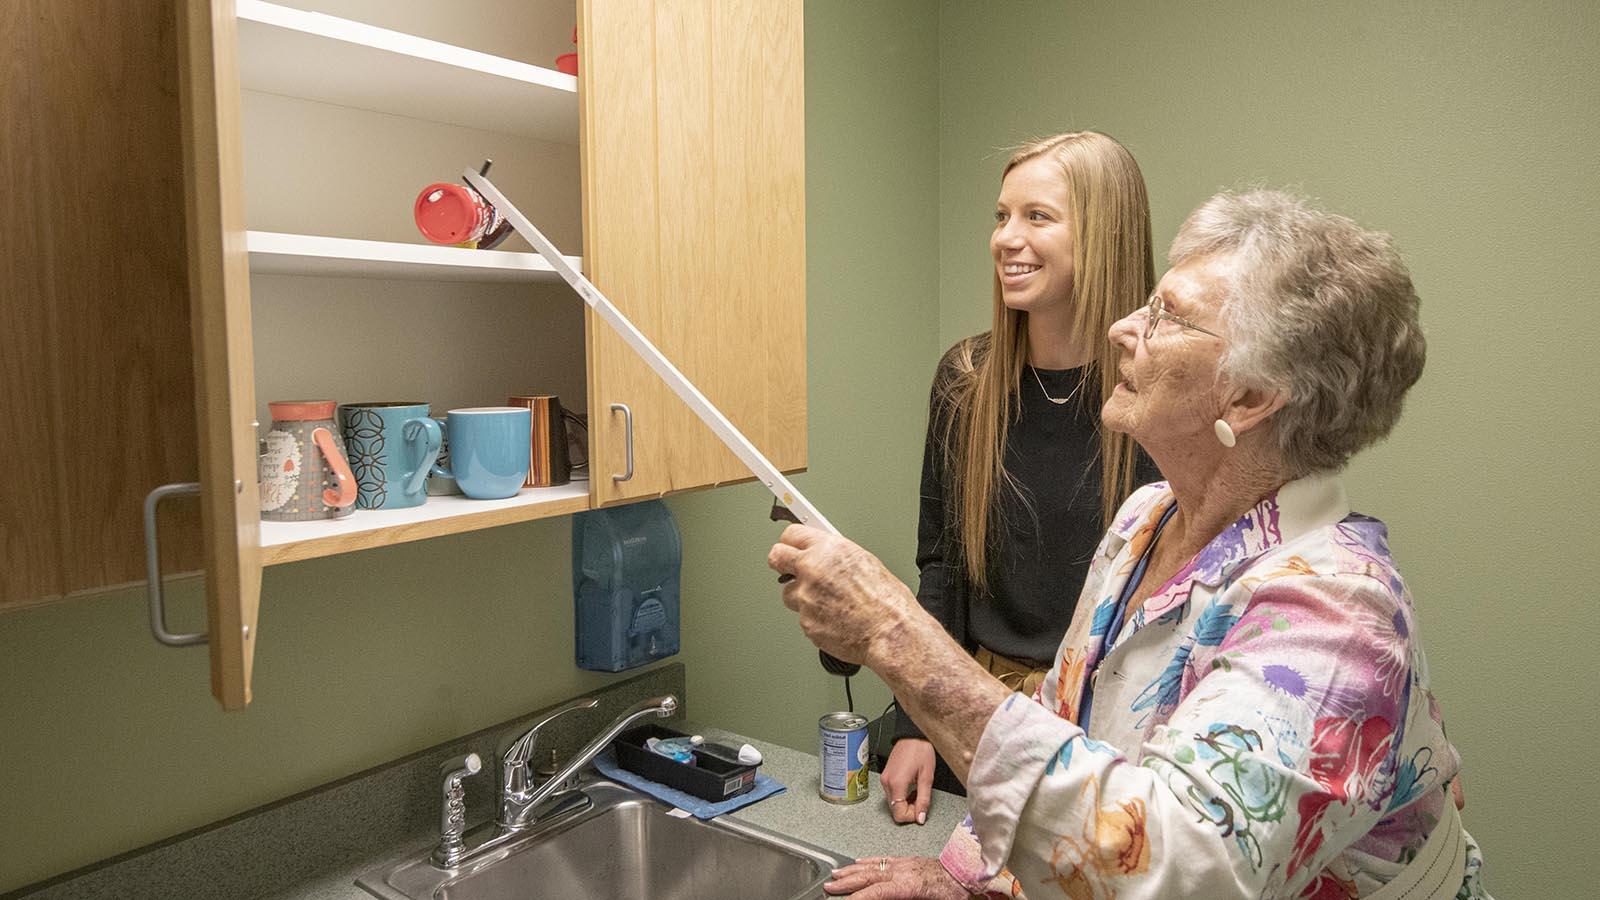 Occupational therapy doctoral student teaching an elderly client how to grab items from the cupboard